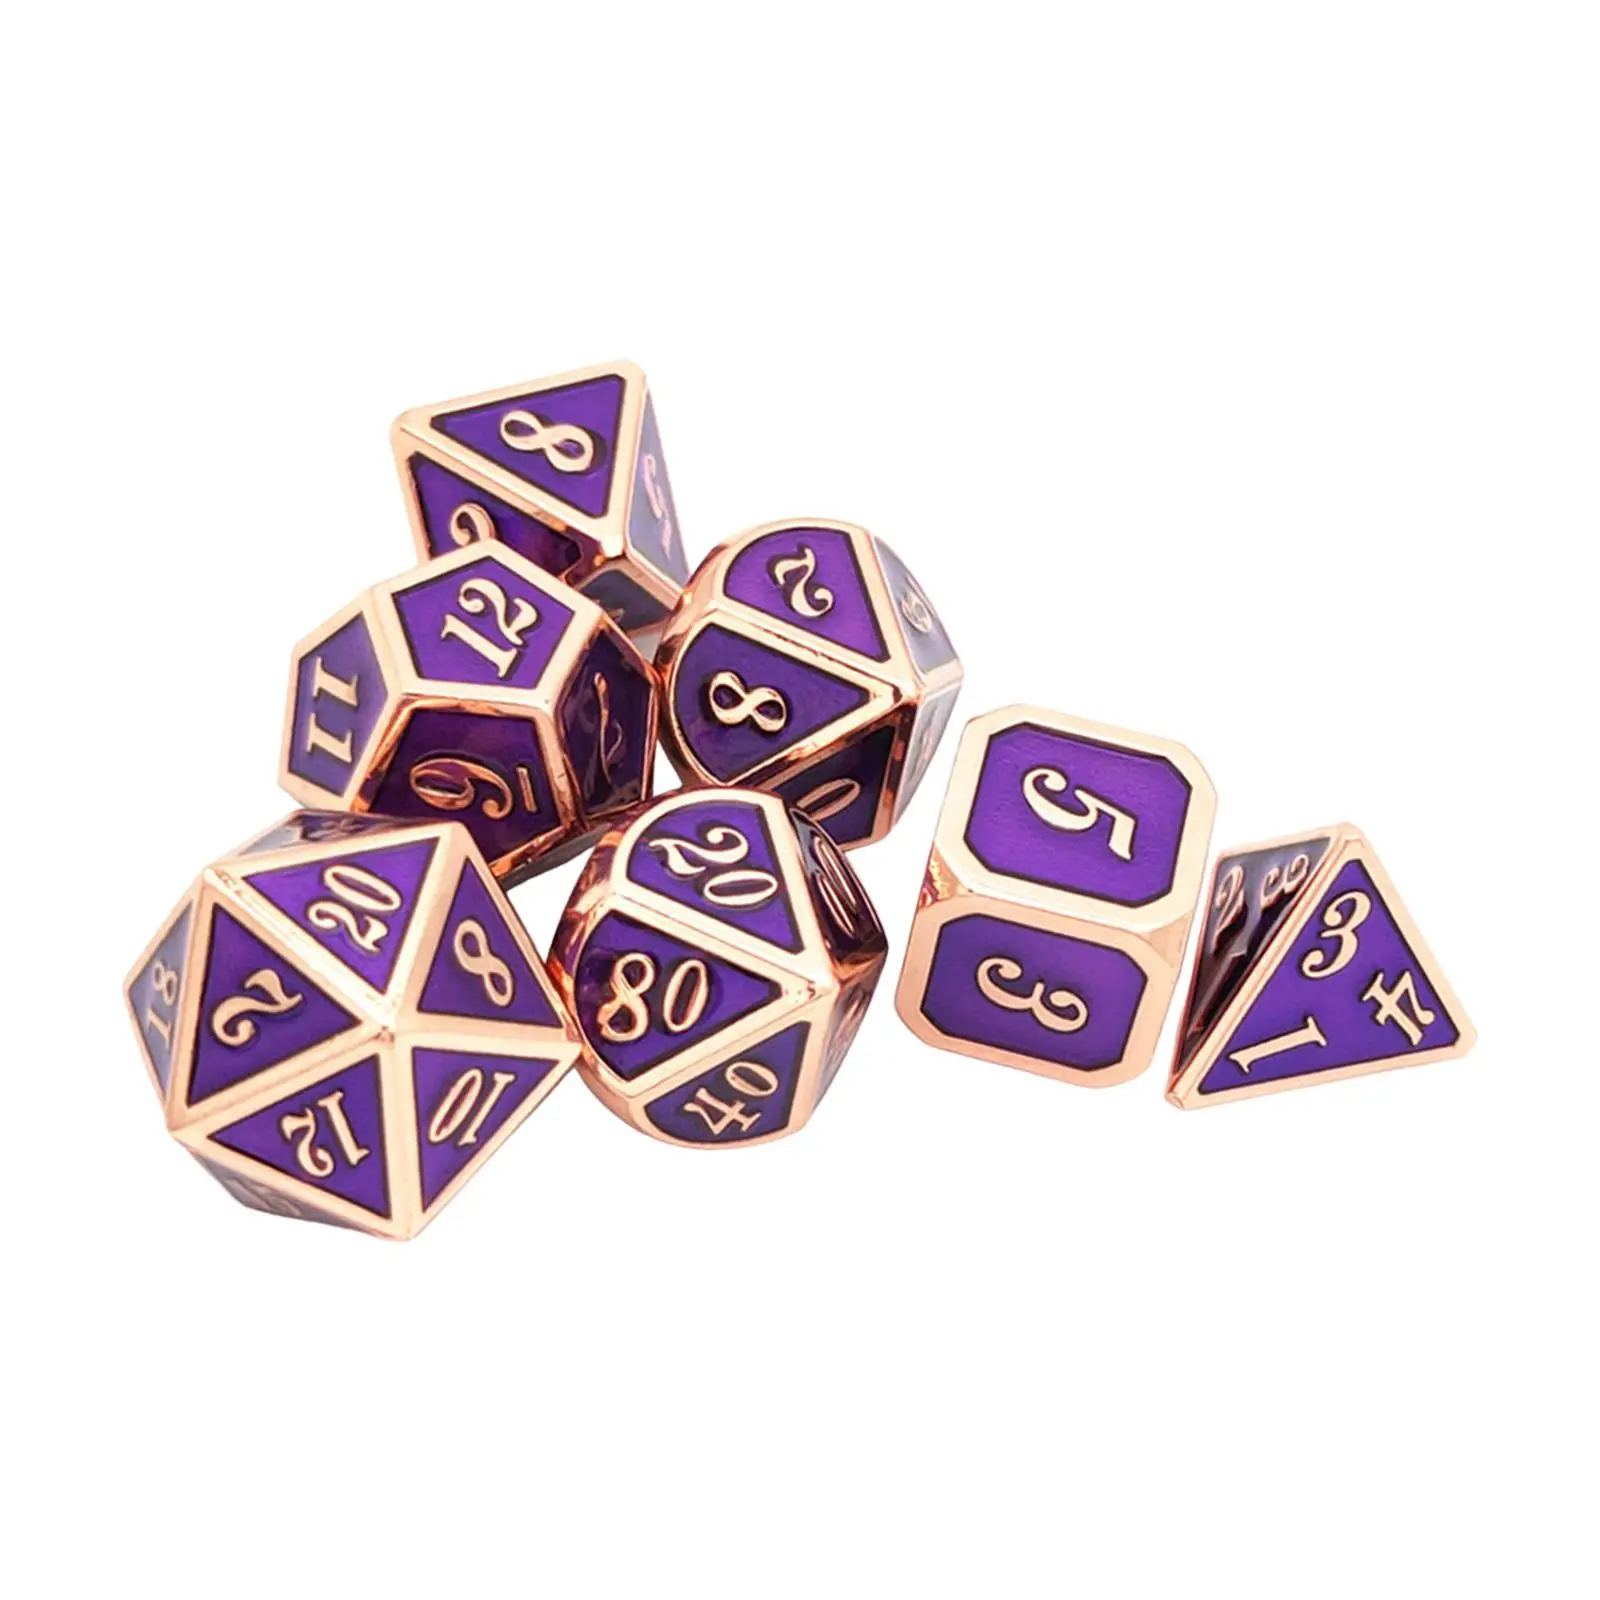 Metal Polyhedral Dice 7Pcs Set Handmade Versatile Reusable Smooth Surface Aluminum Alloy Accessory for Interactive Games